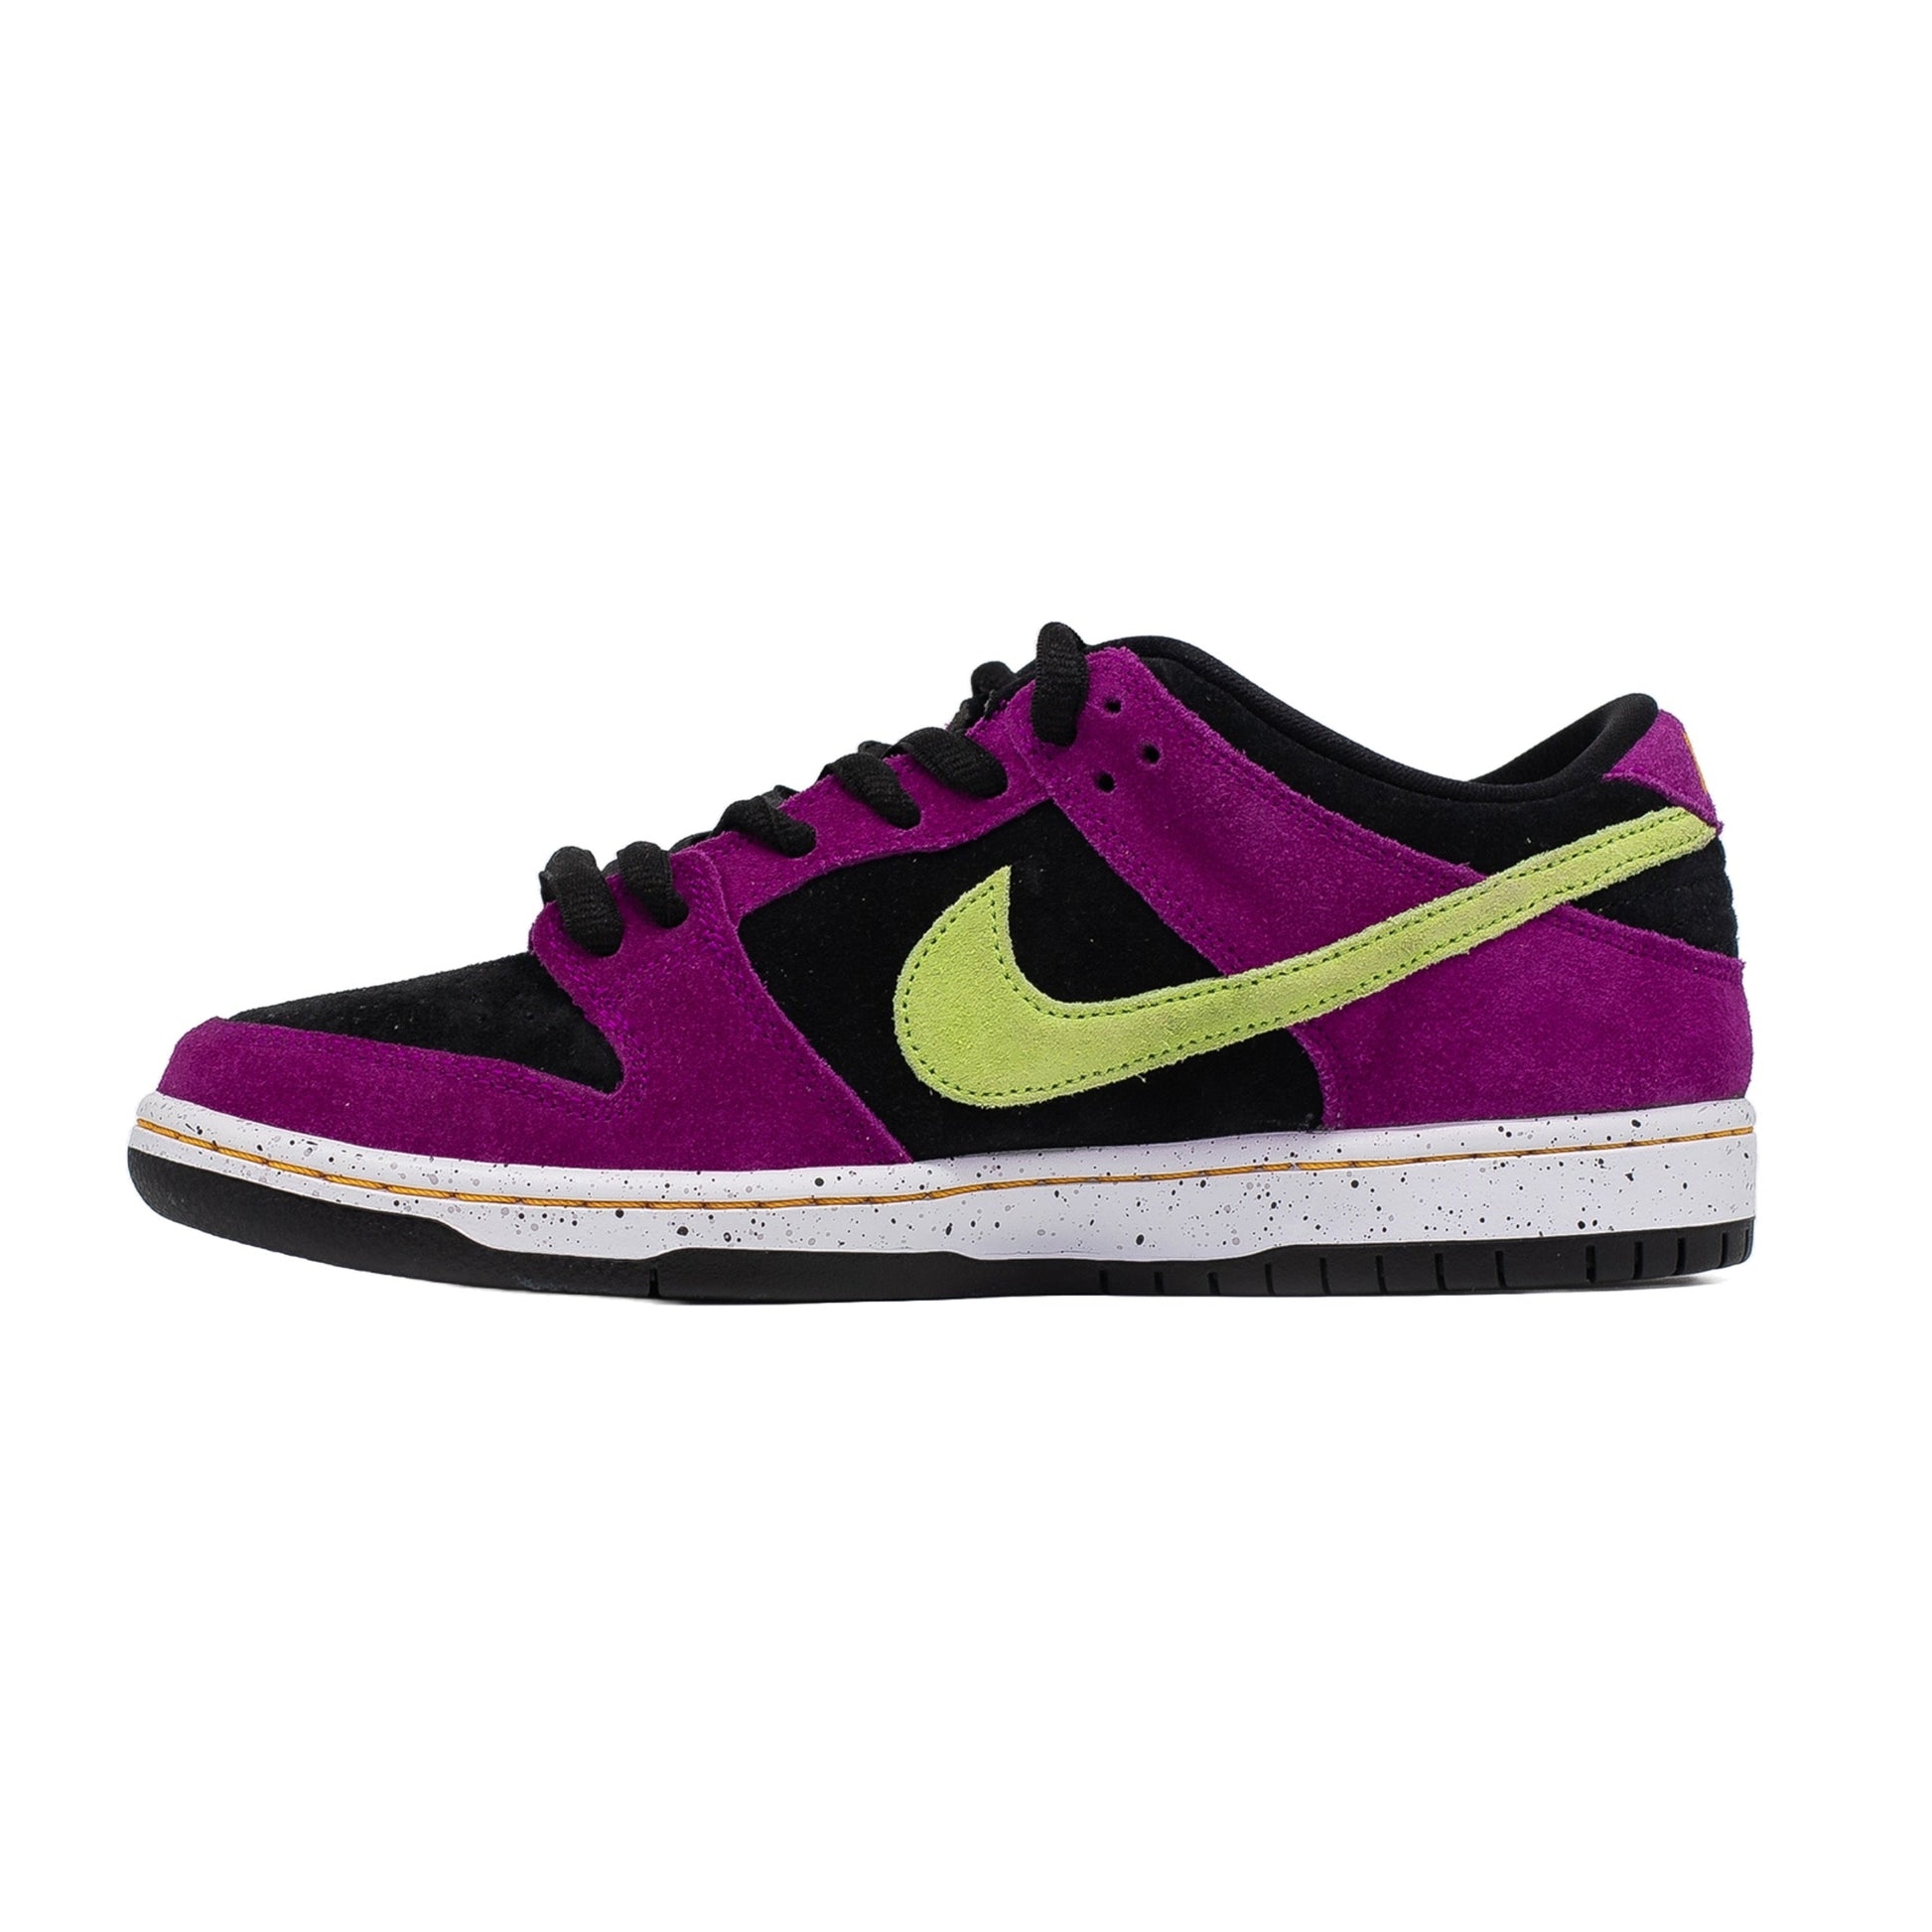 nike air toukol leather shoes clearance women